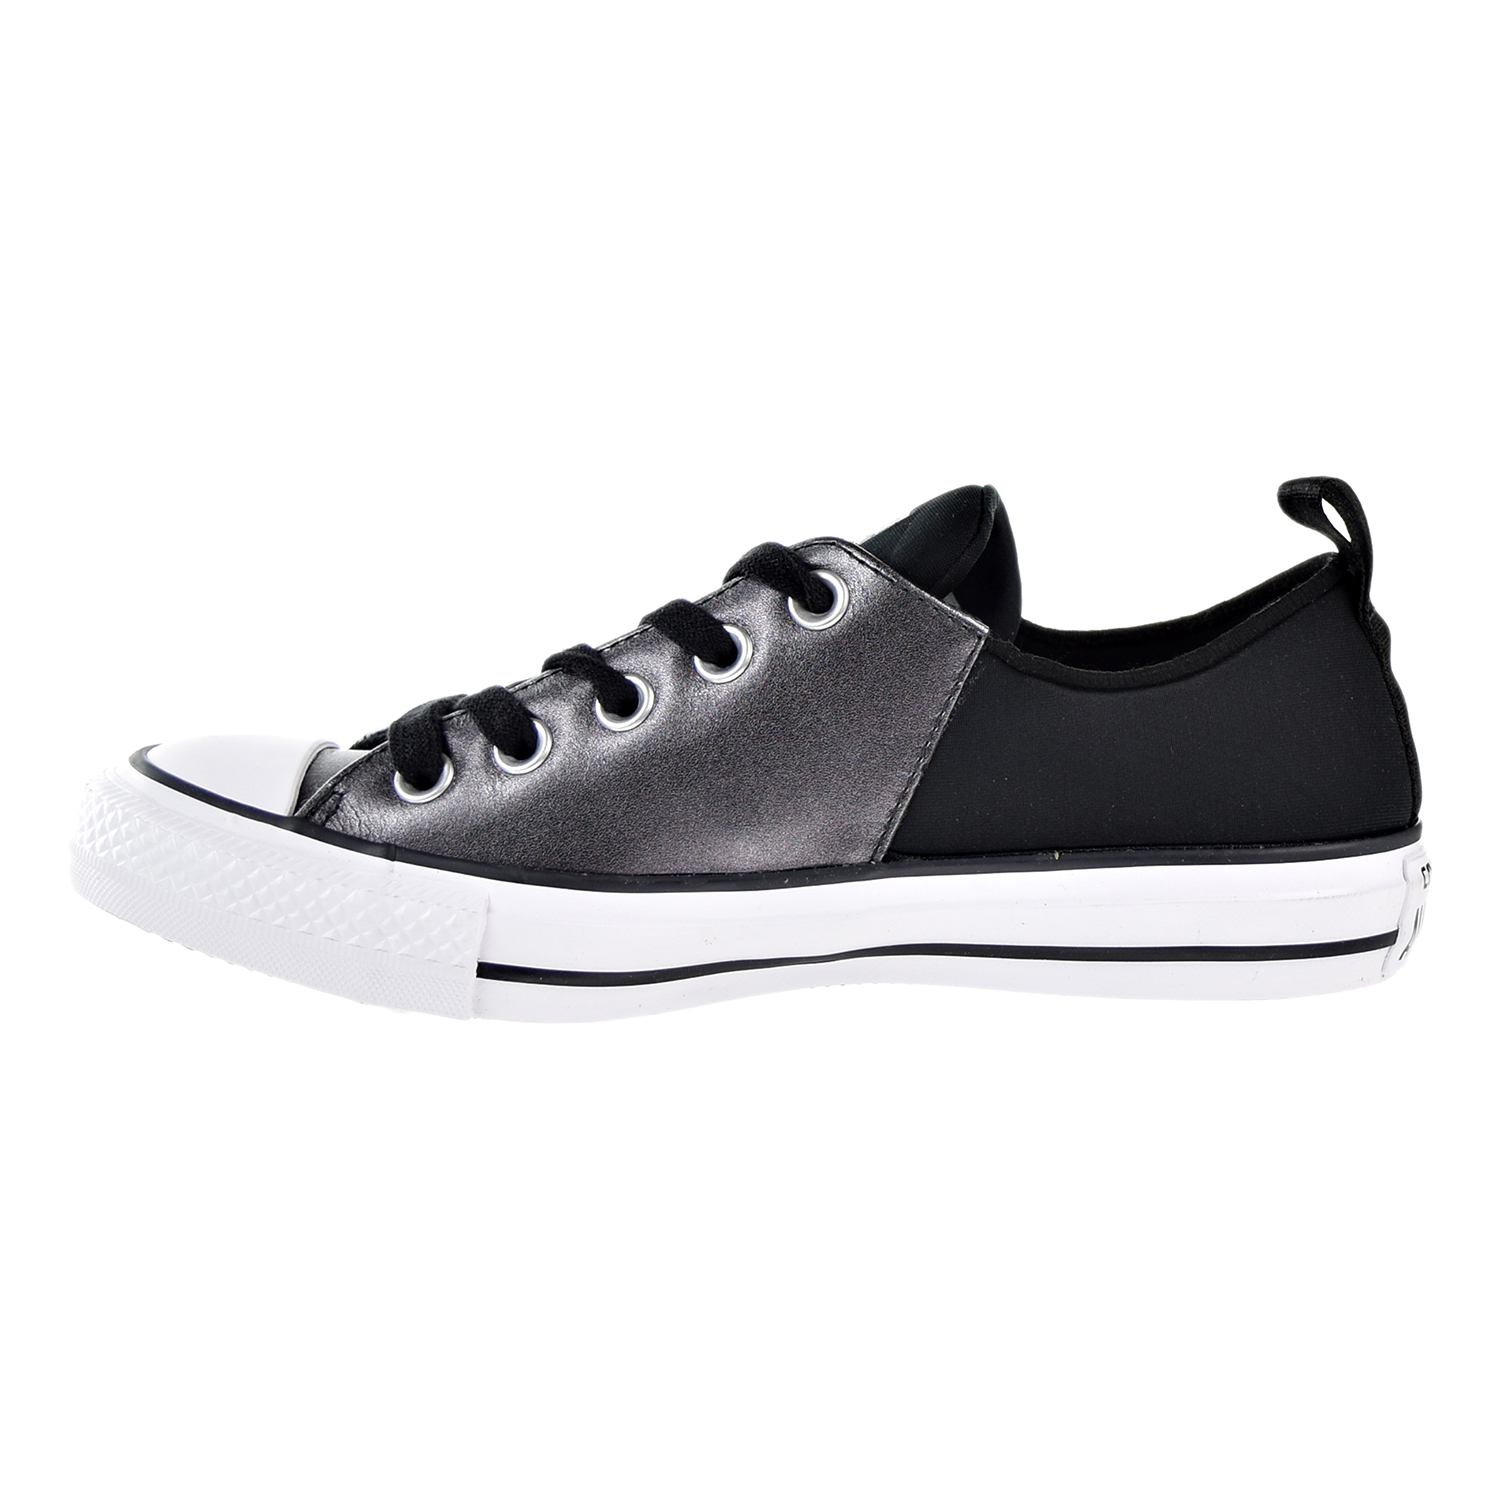 Converse Chuck Taylor All Star Sloane Glam Leather Low Top Women's Shoe Black/White555835c - image 4 of 6